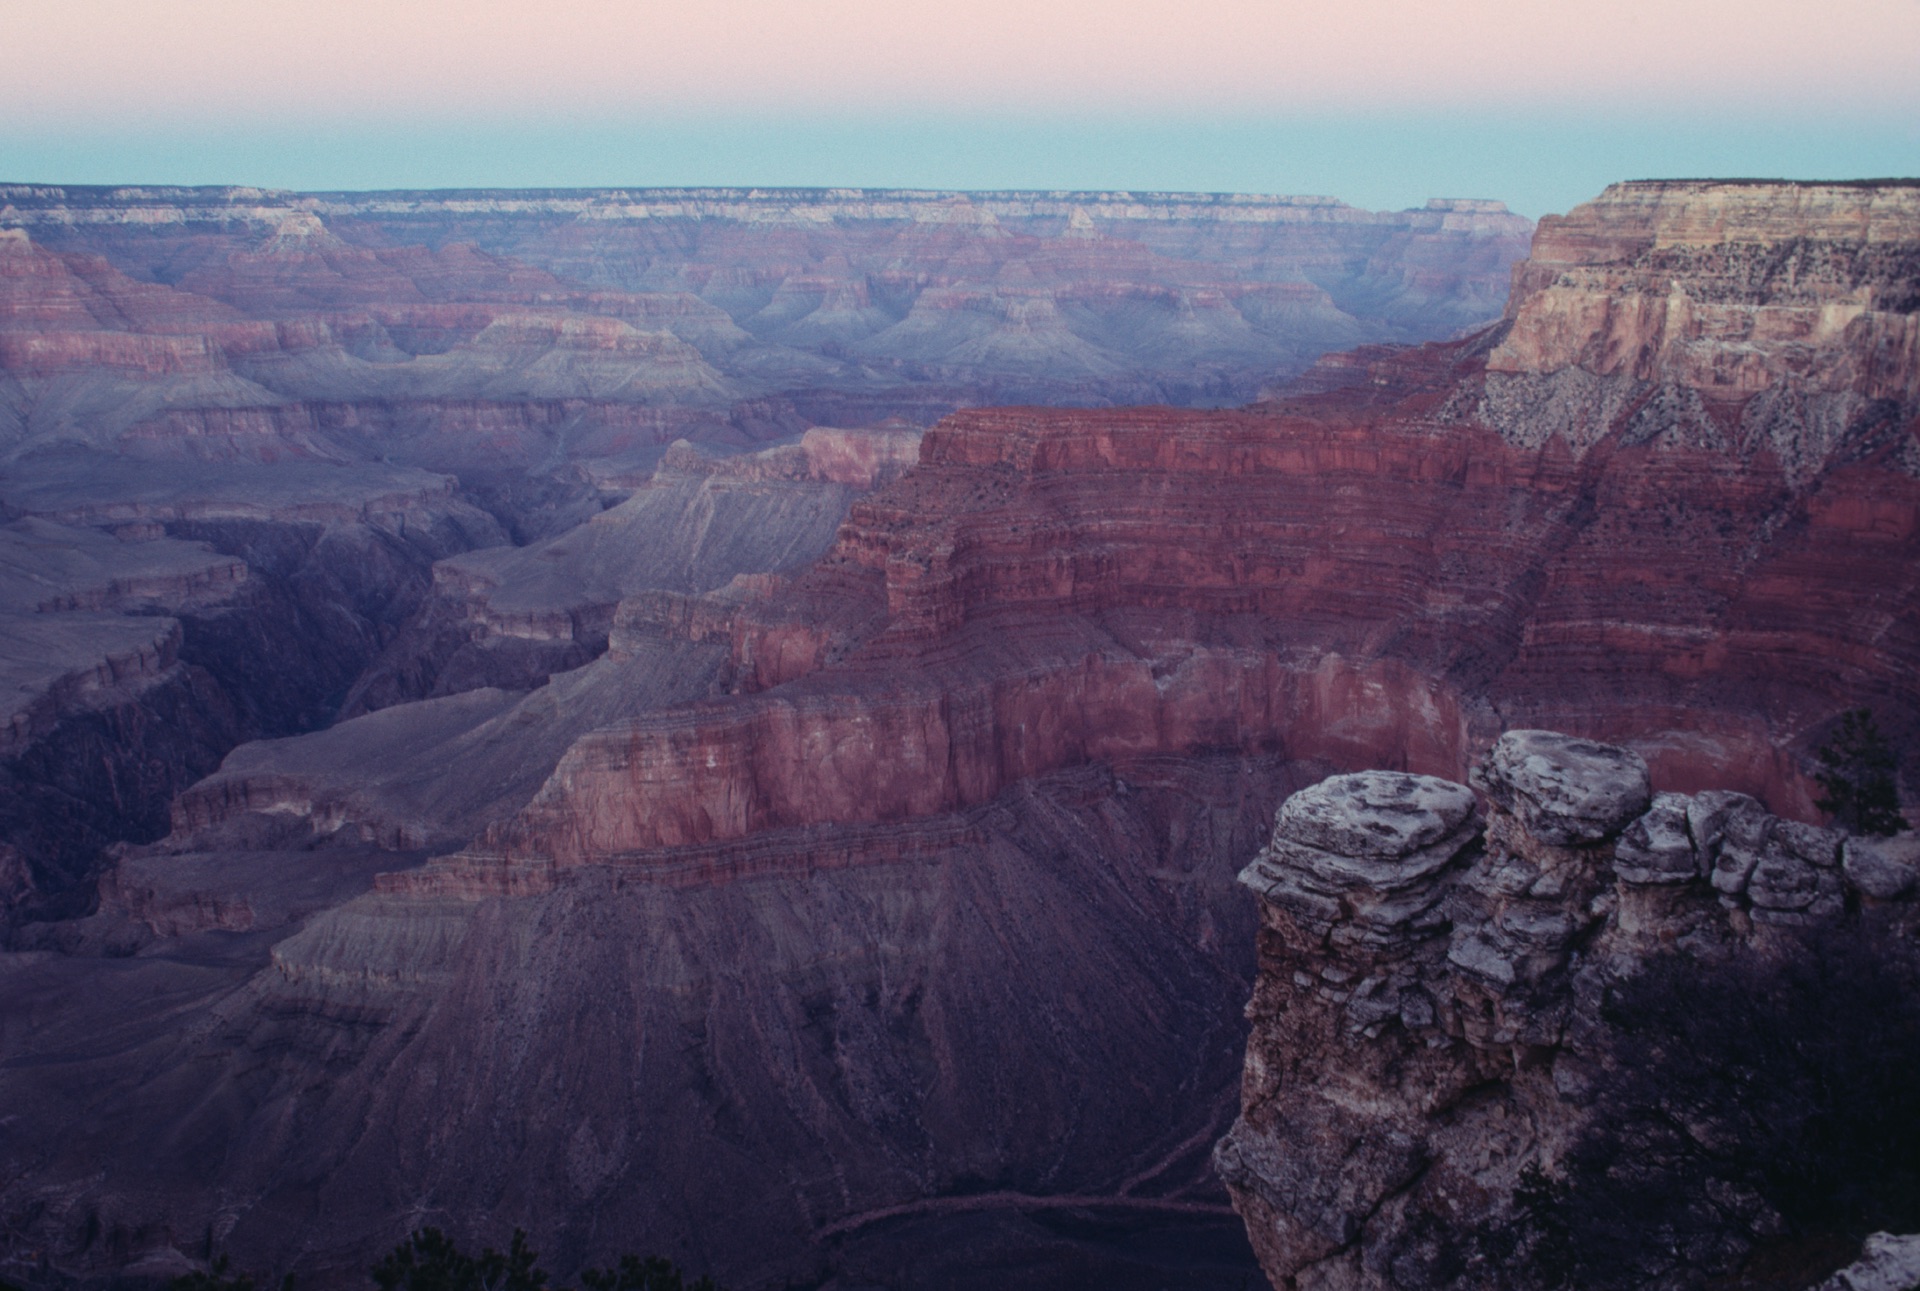 Sunsest and rose colored strata, Pima Point